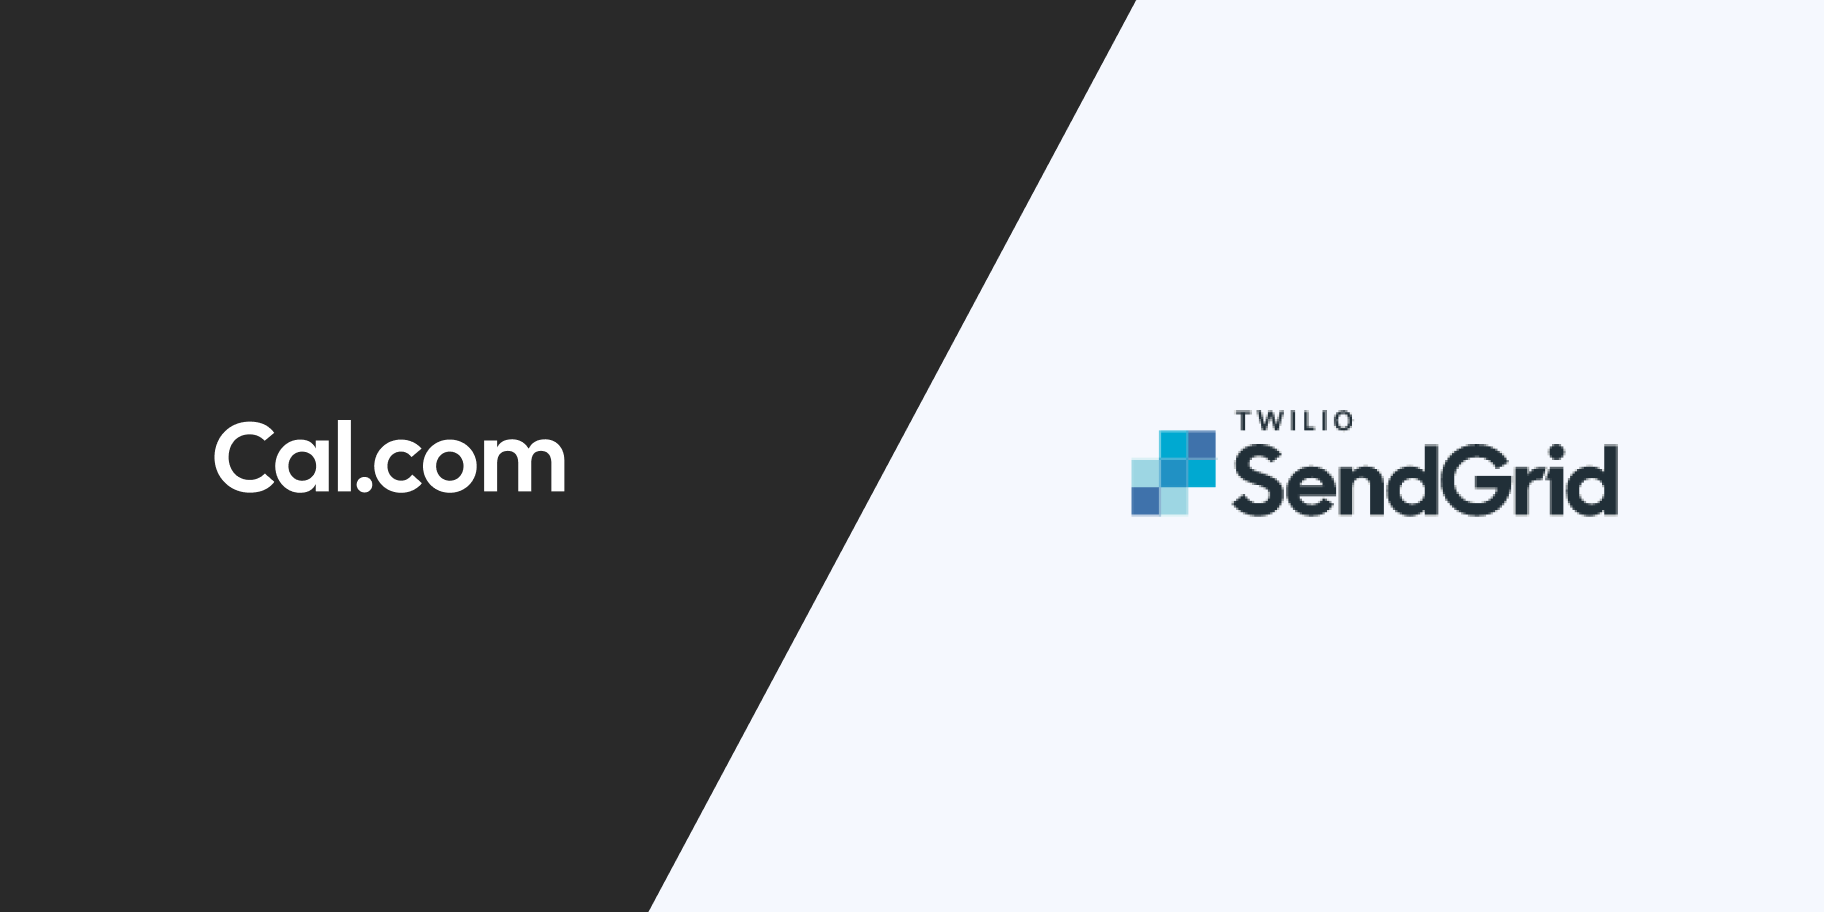 How to use SendGrid by Twilio with Cal.com